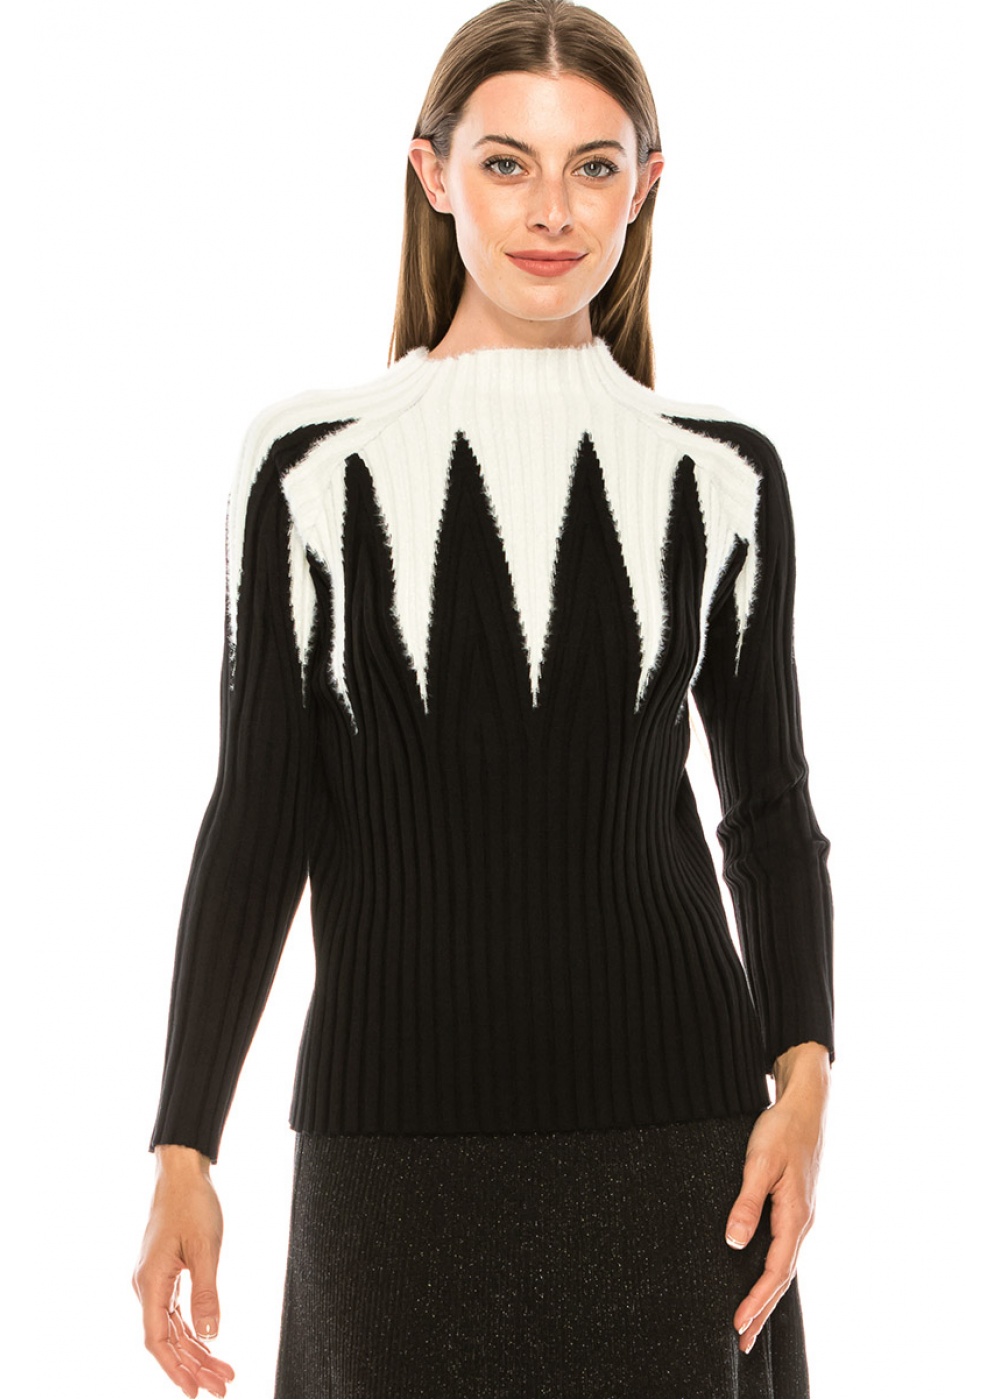 Geometric petals sweater in black and white